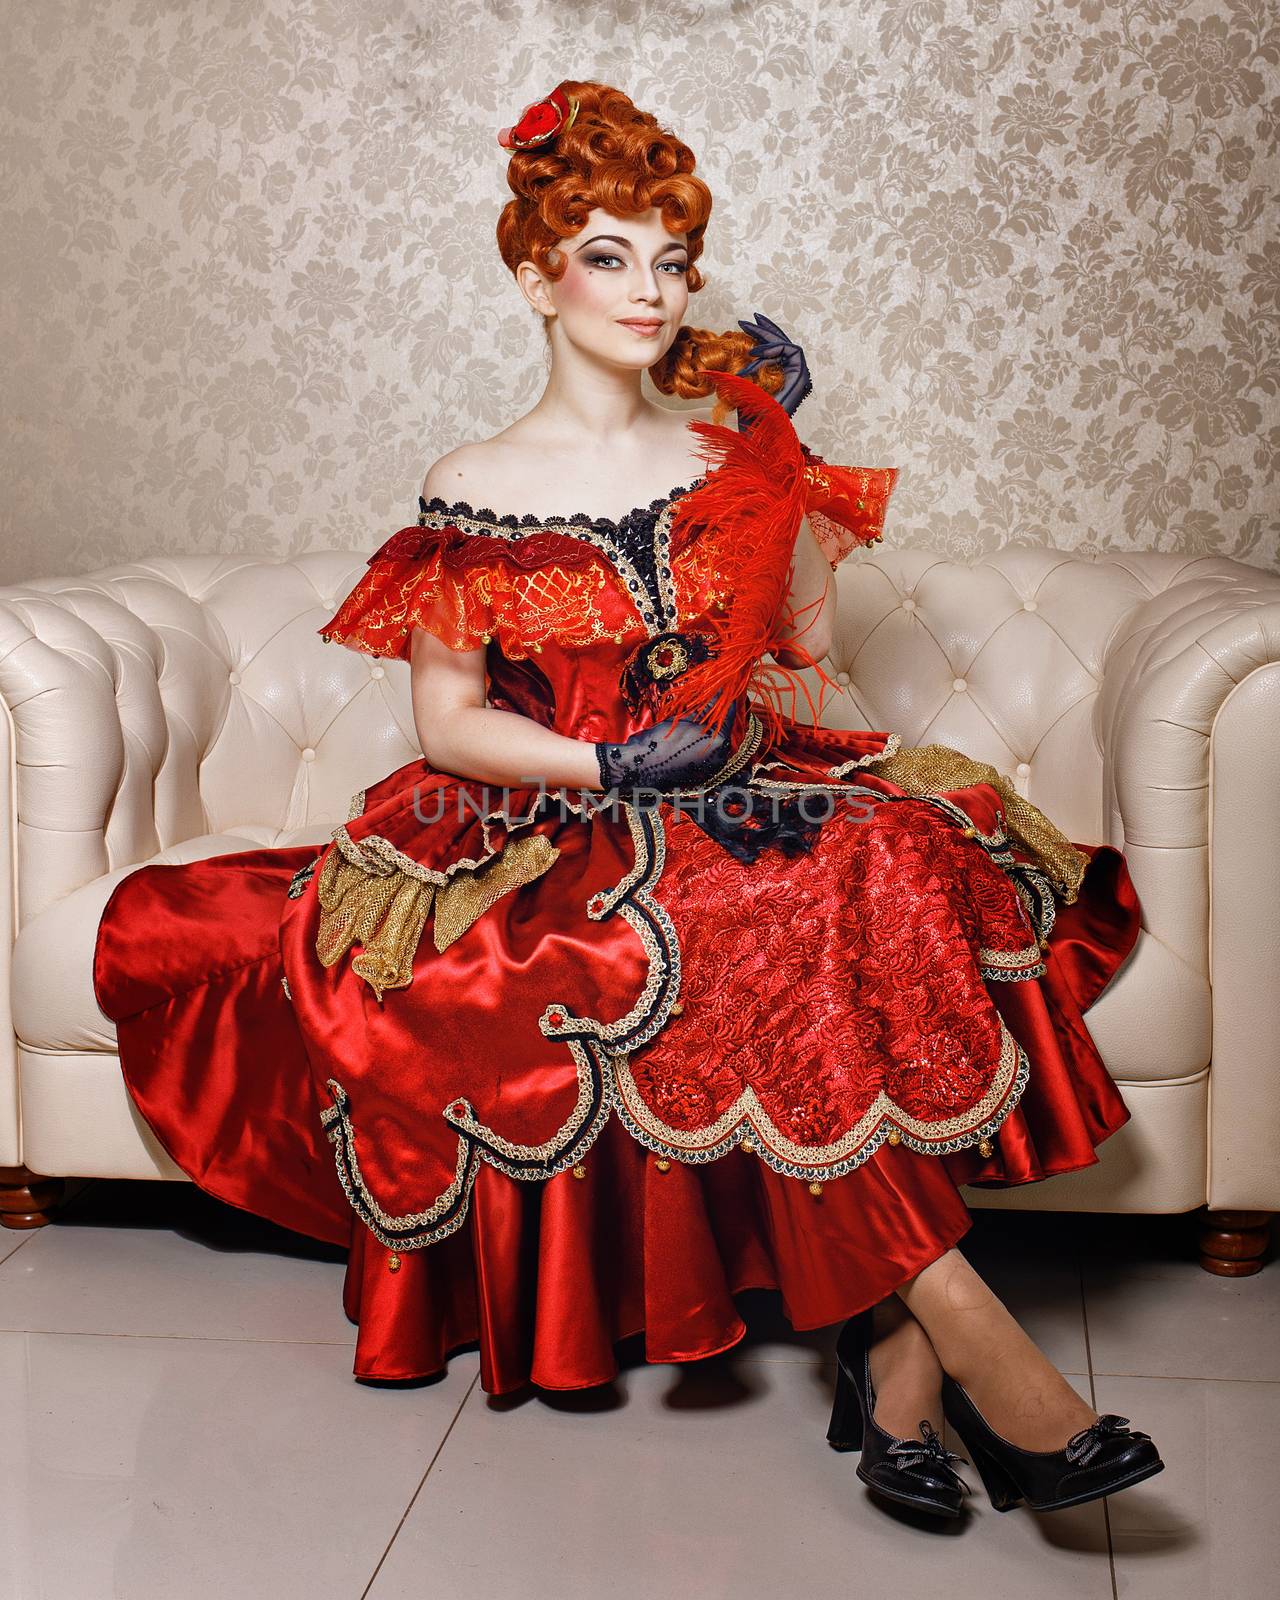 Attractive girl red dress and red wig courtesan